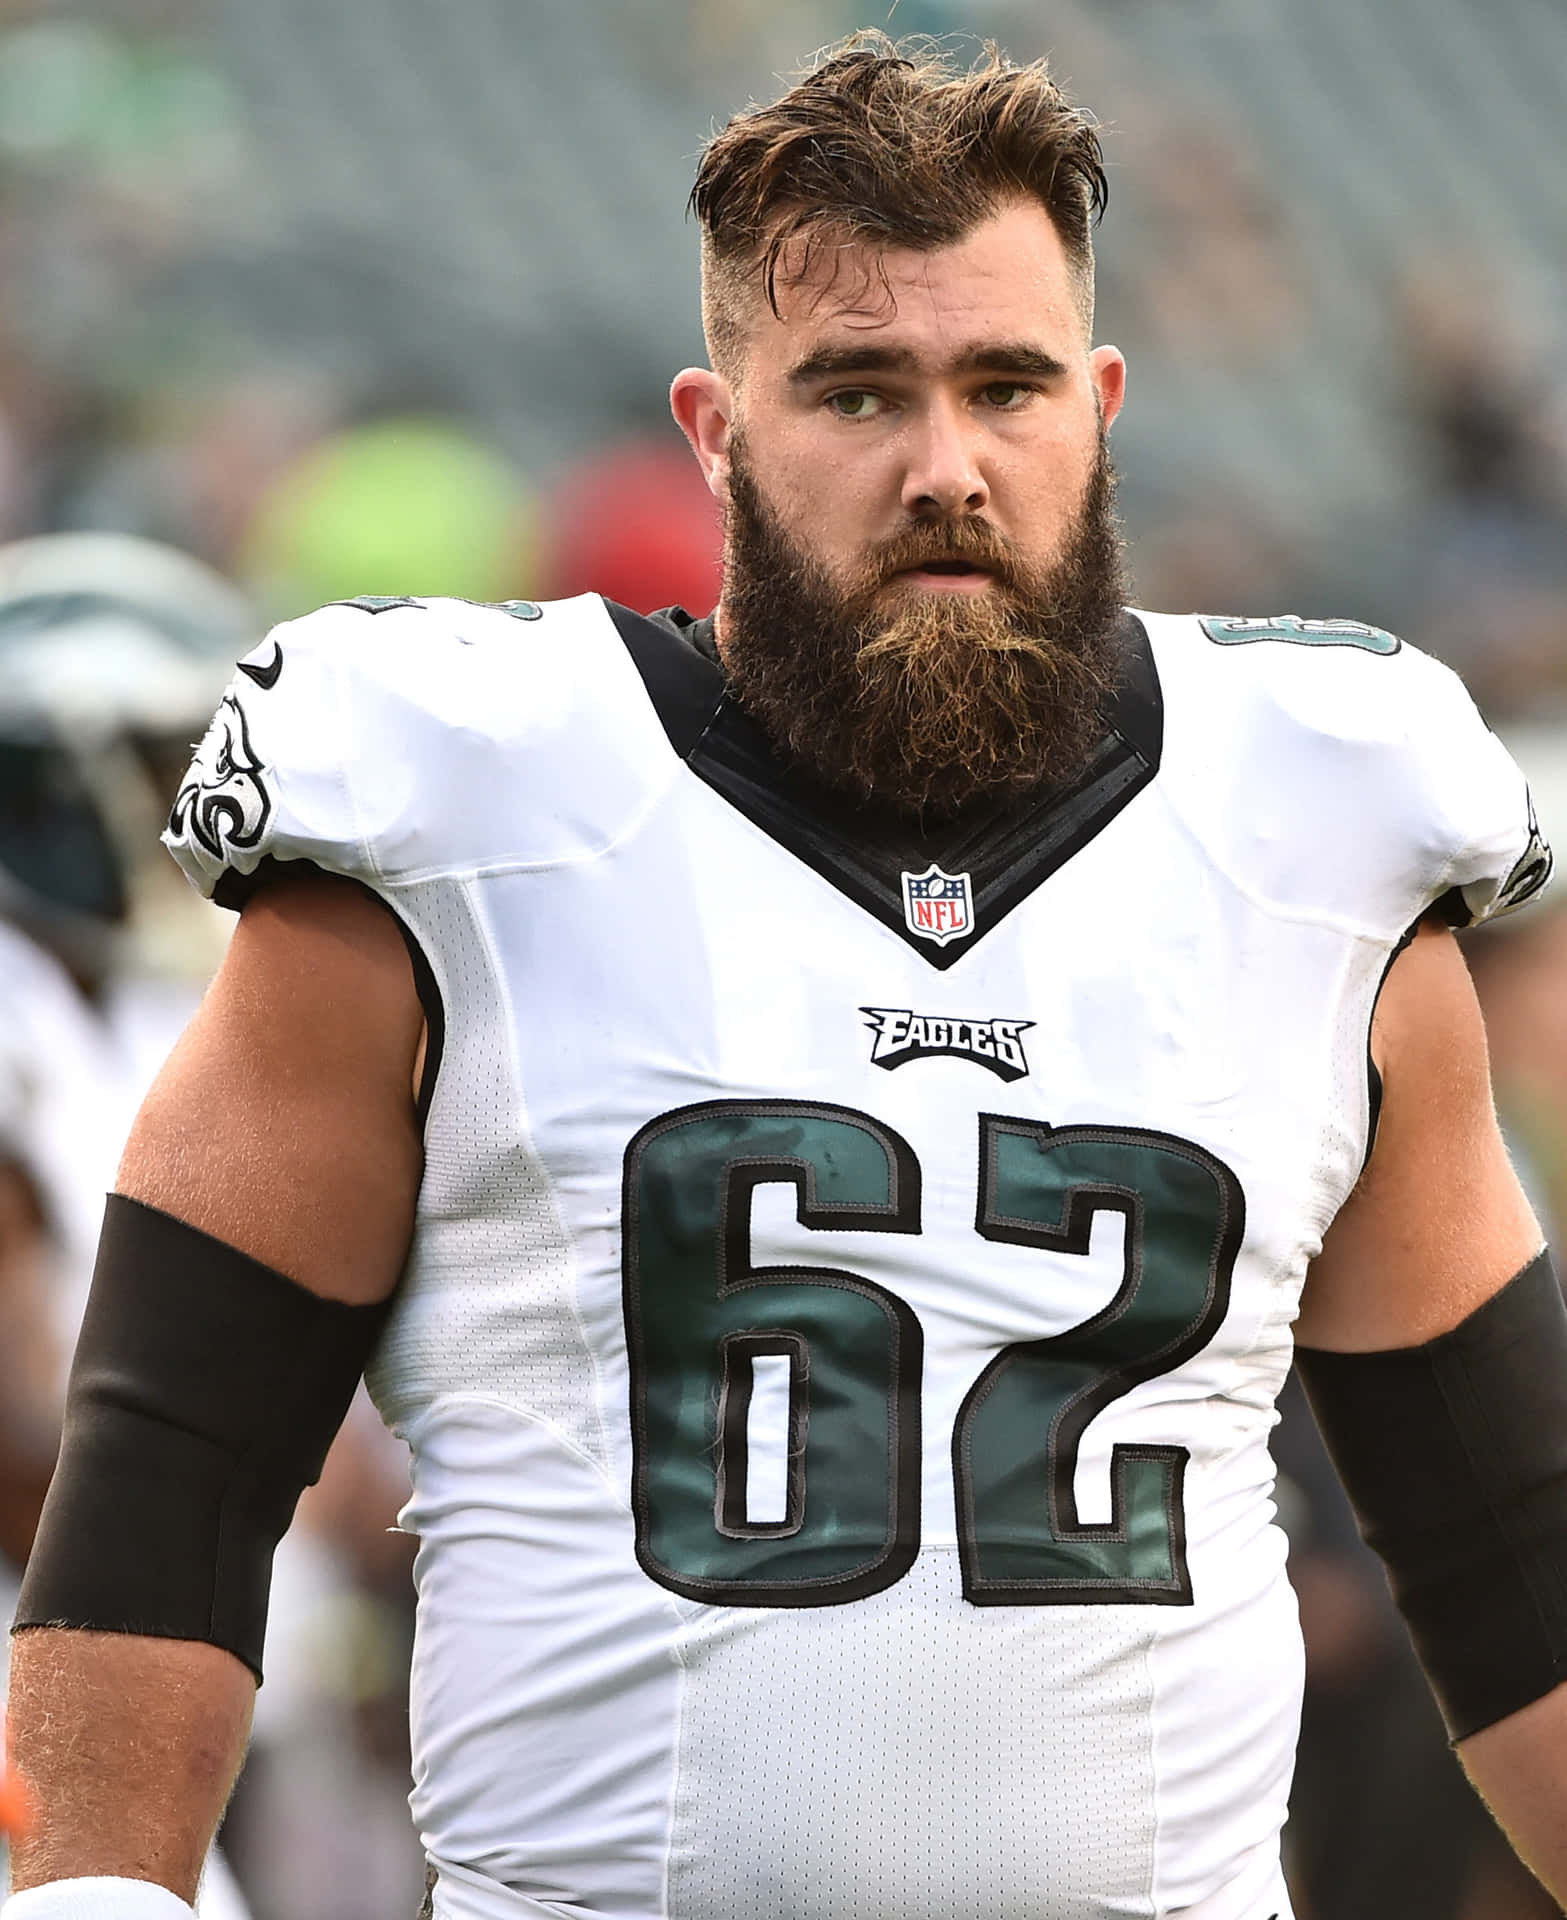 Jason Kelce in action during a football game Wallpaper